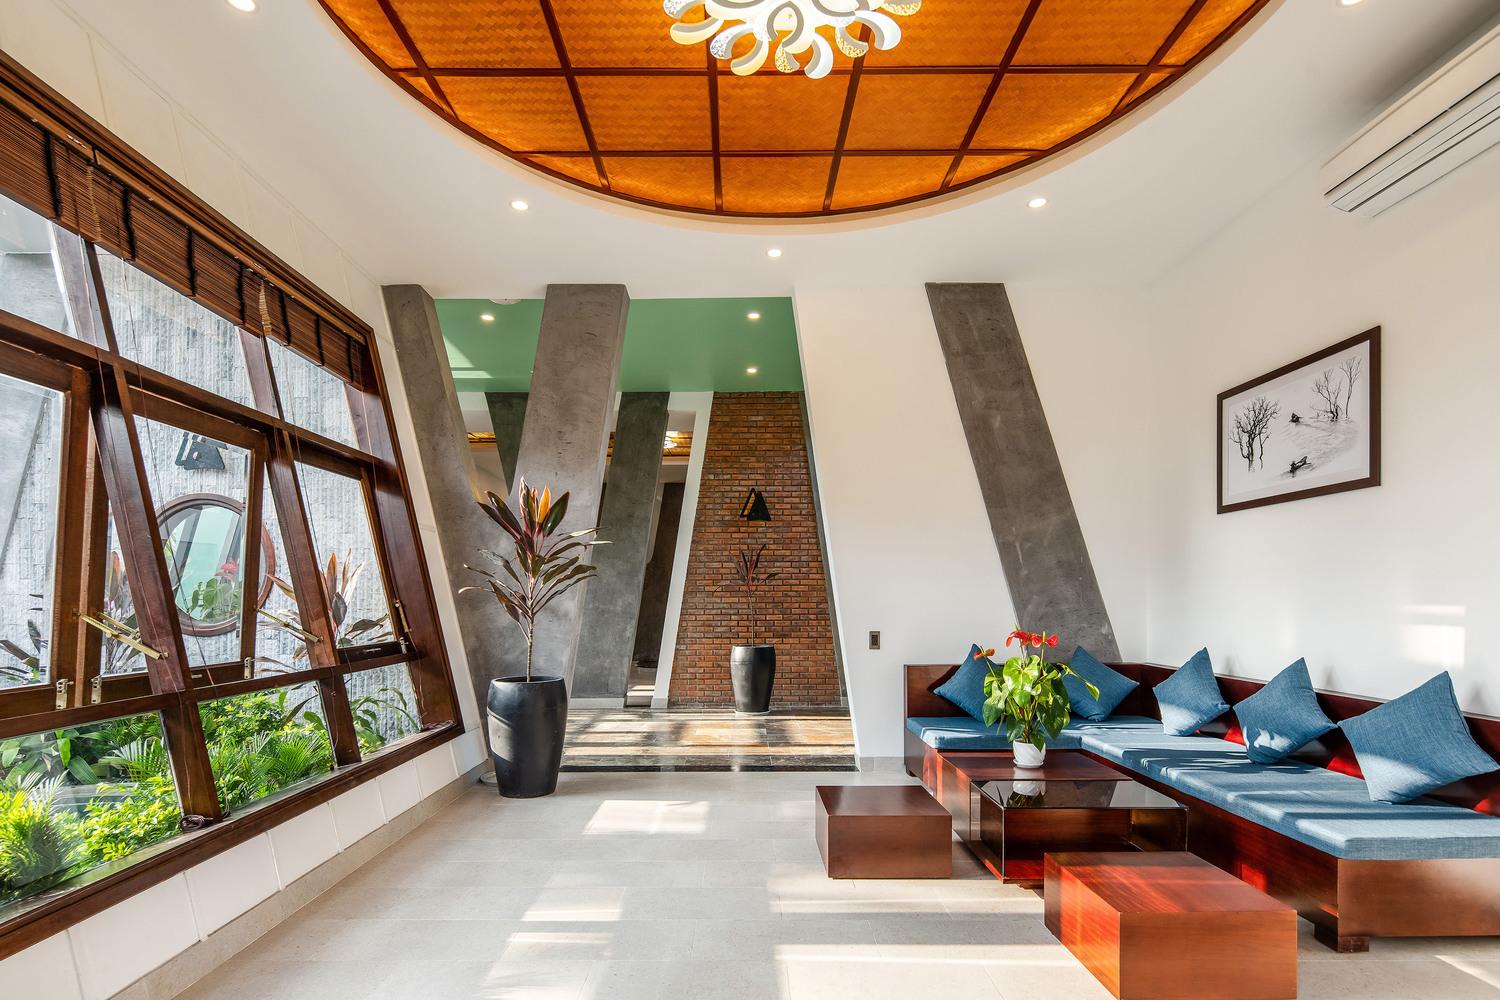 A Vietnam Sanctuary That Inherits Old-Time Natural and Cultural Elements